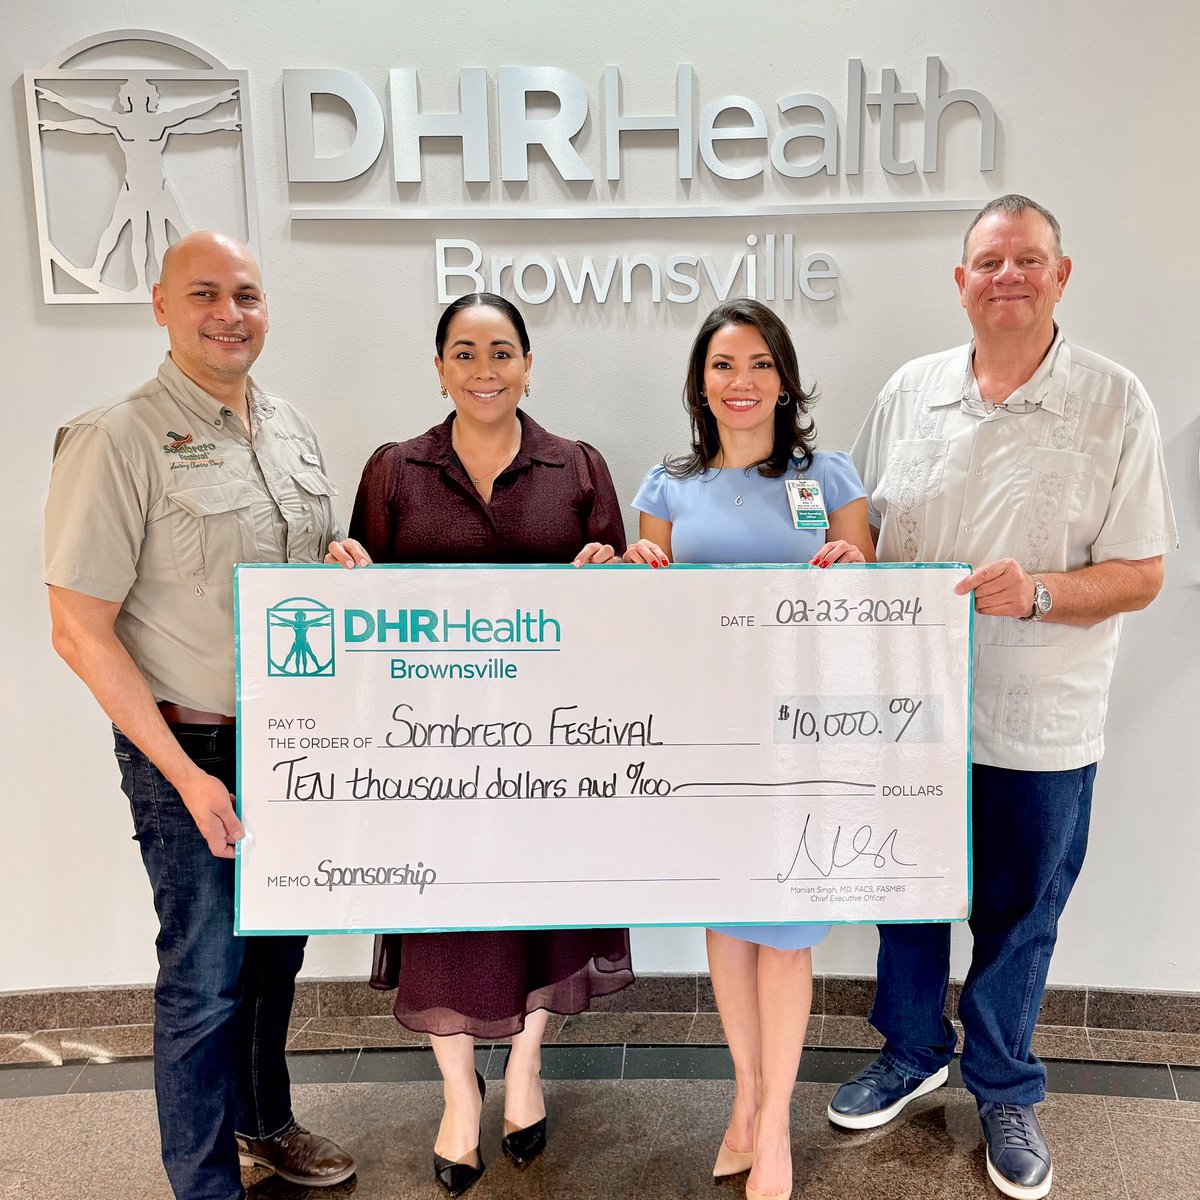 See you at Sombrero Fest! DHR Health Brownsville hospital leadership presented the Sombrero Festival board members with a sponsorship check for this year's festivities. #DHRHealth #DHRHealthBrownsville #Brownsville #BrownsvilleTx #Hospital #RGV #SombreroFestival #CameronCounty